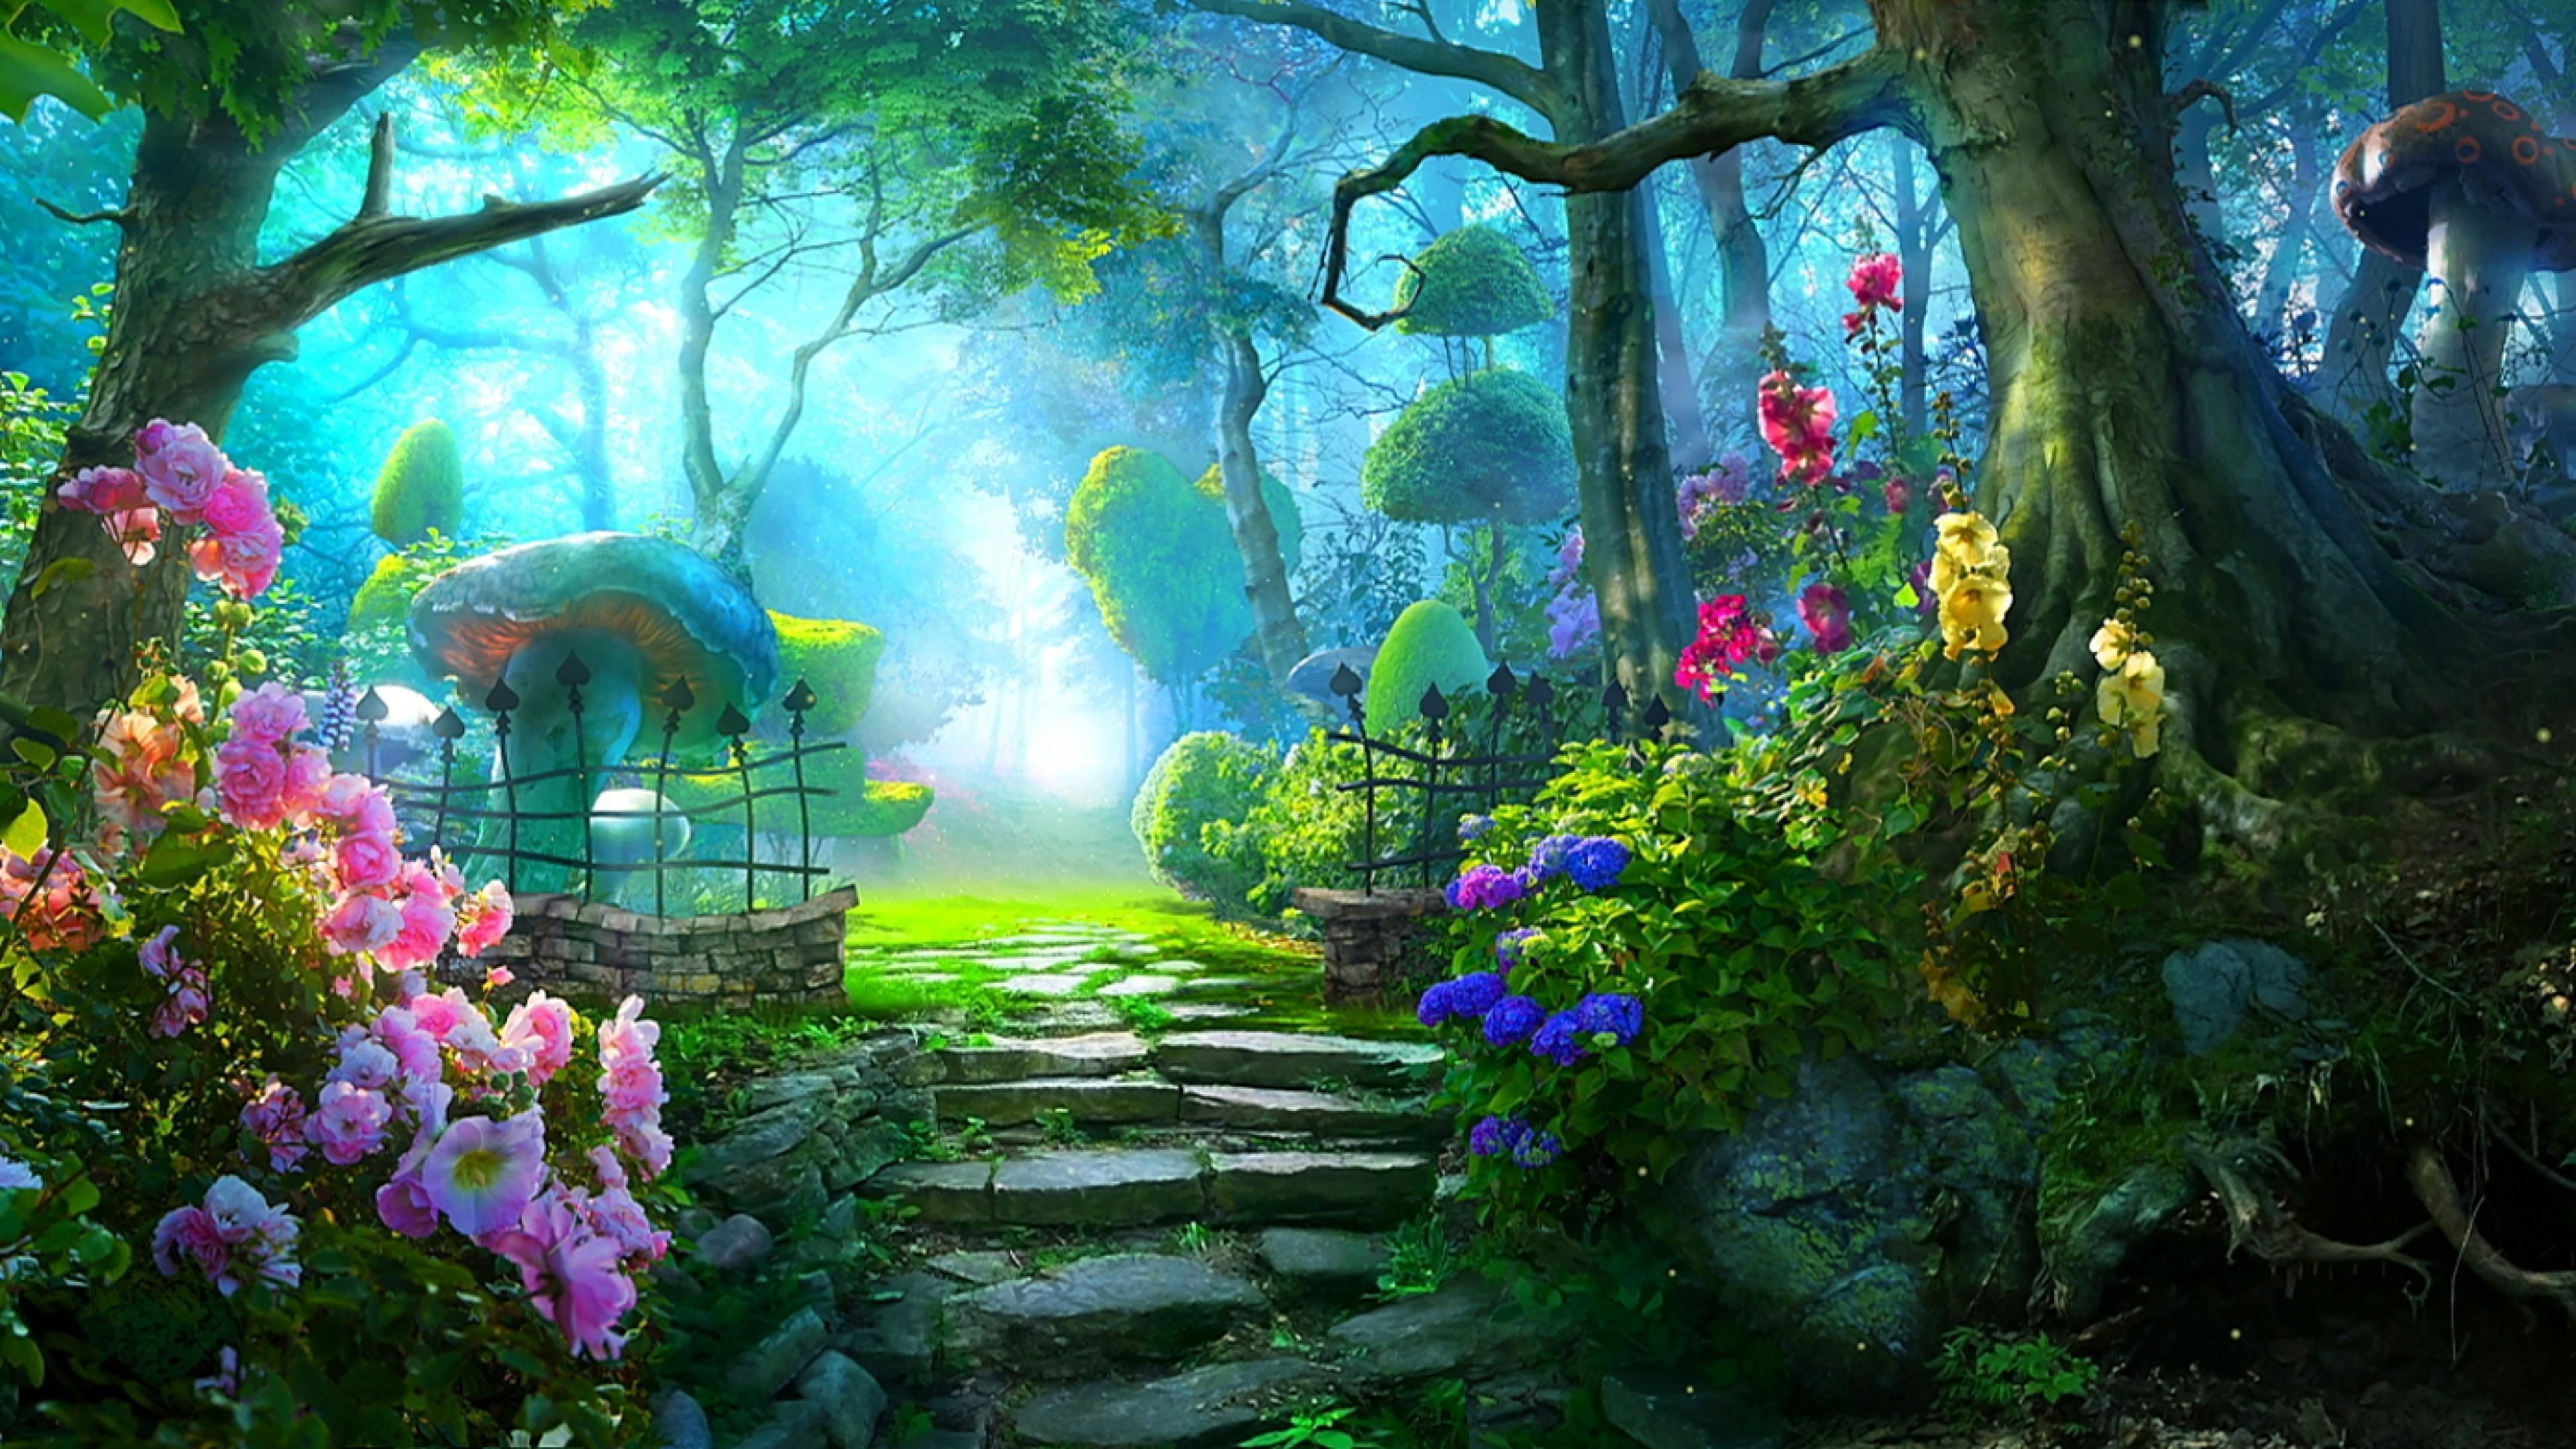 Enchanted Forest Wallpaper Free Enchanted Forest Background - Anime scenery wallpaper, Fantasy art landscapes, Scenery wallpaper